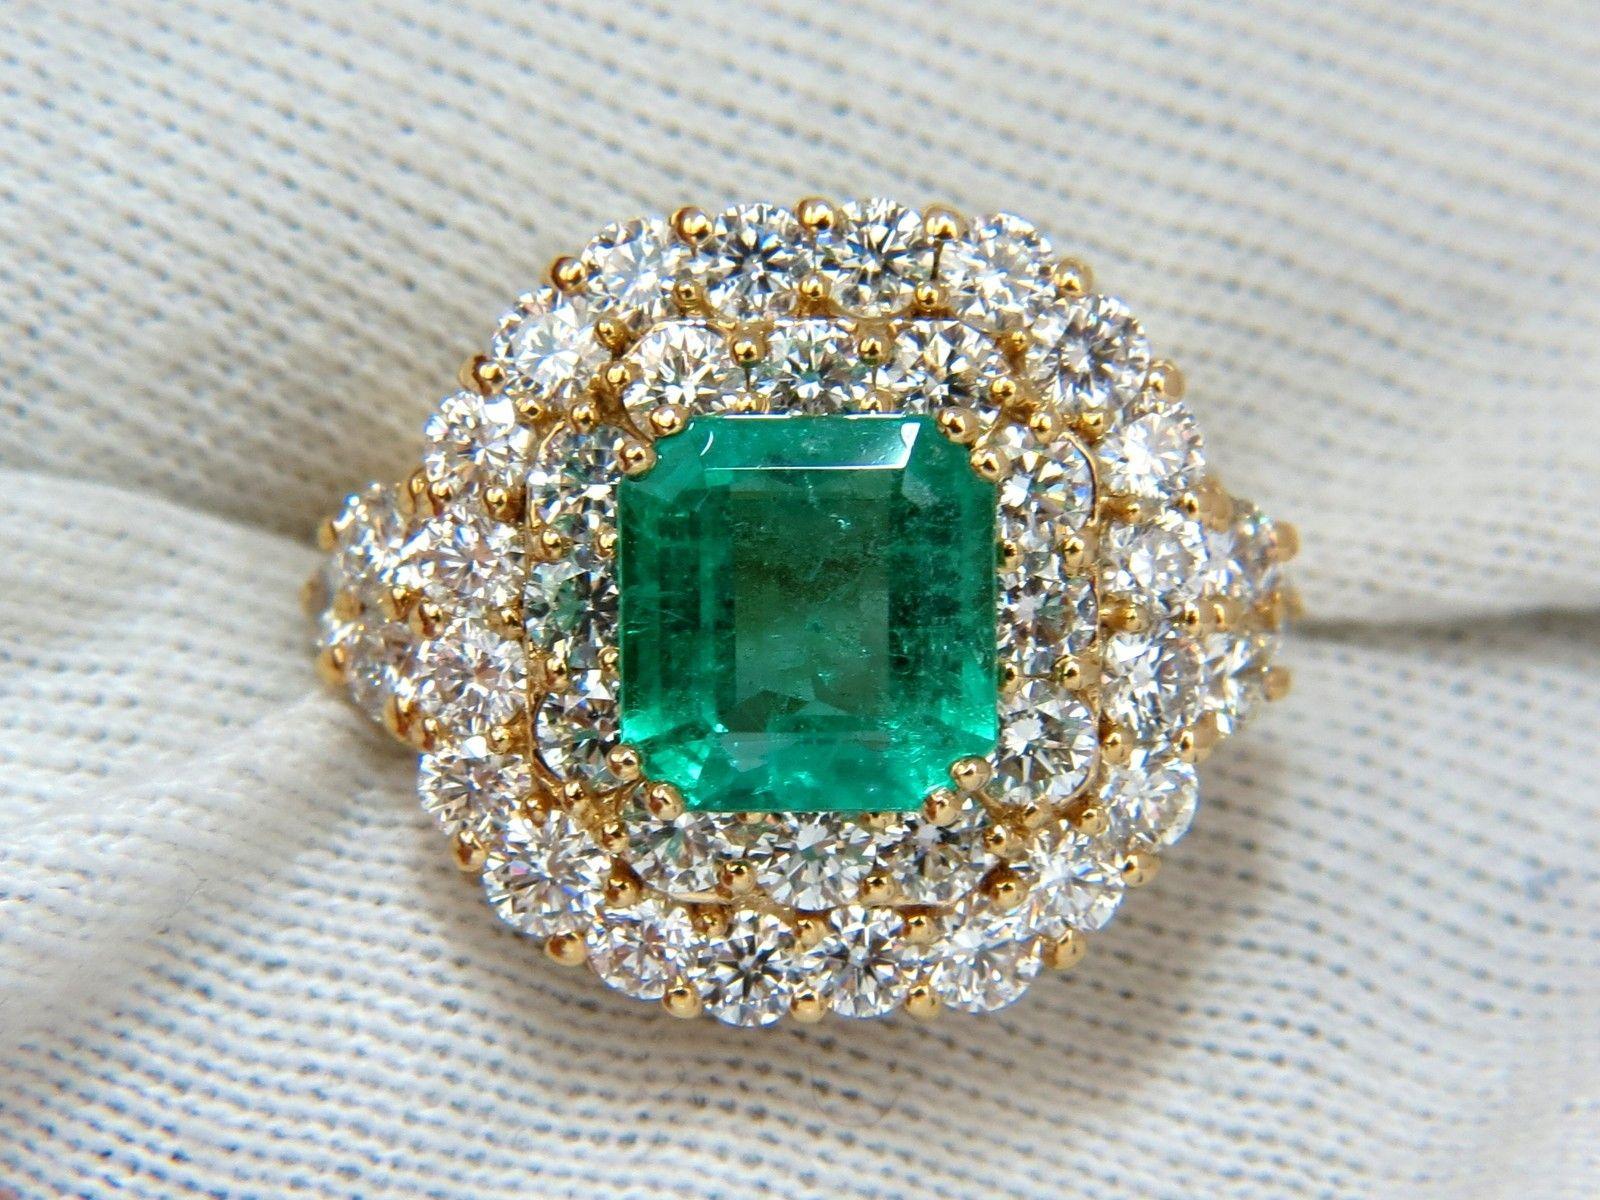 GIA 7.51 Natural Colombia Bright Green Emerald Diamonds Ring 18 Karat In New Condition For Sale In New York, NY